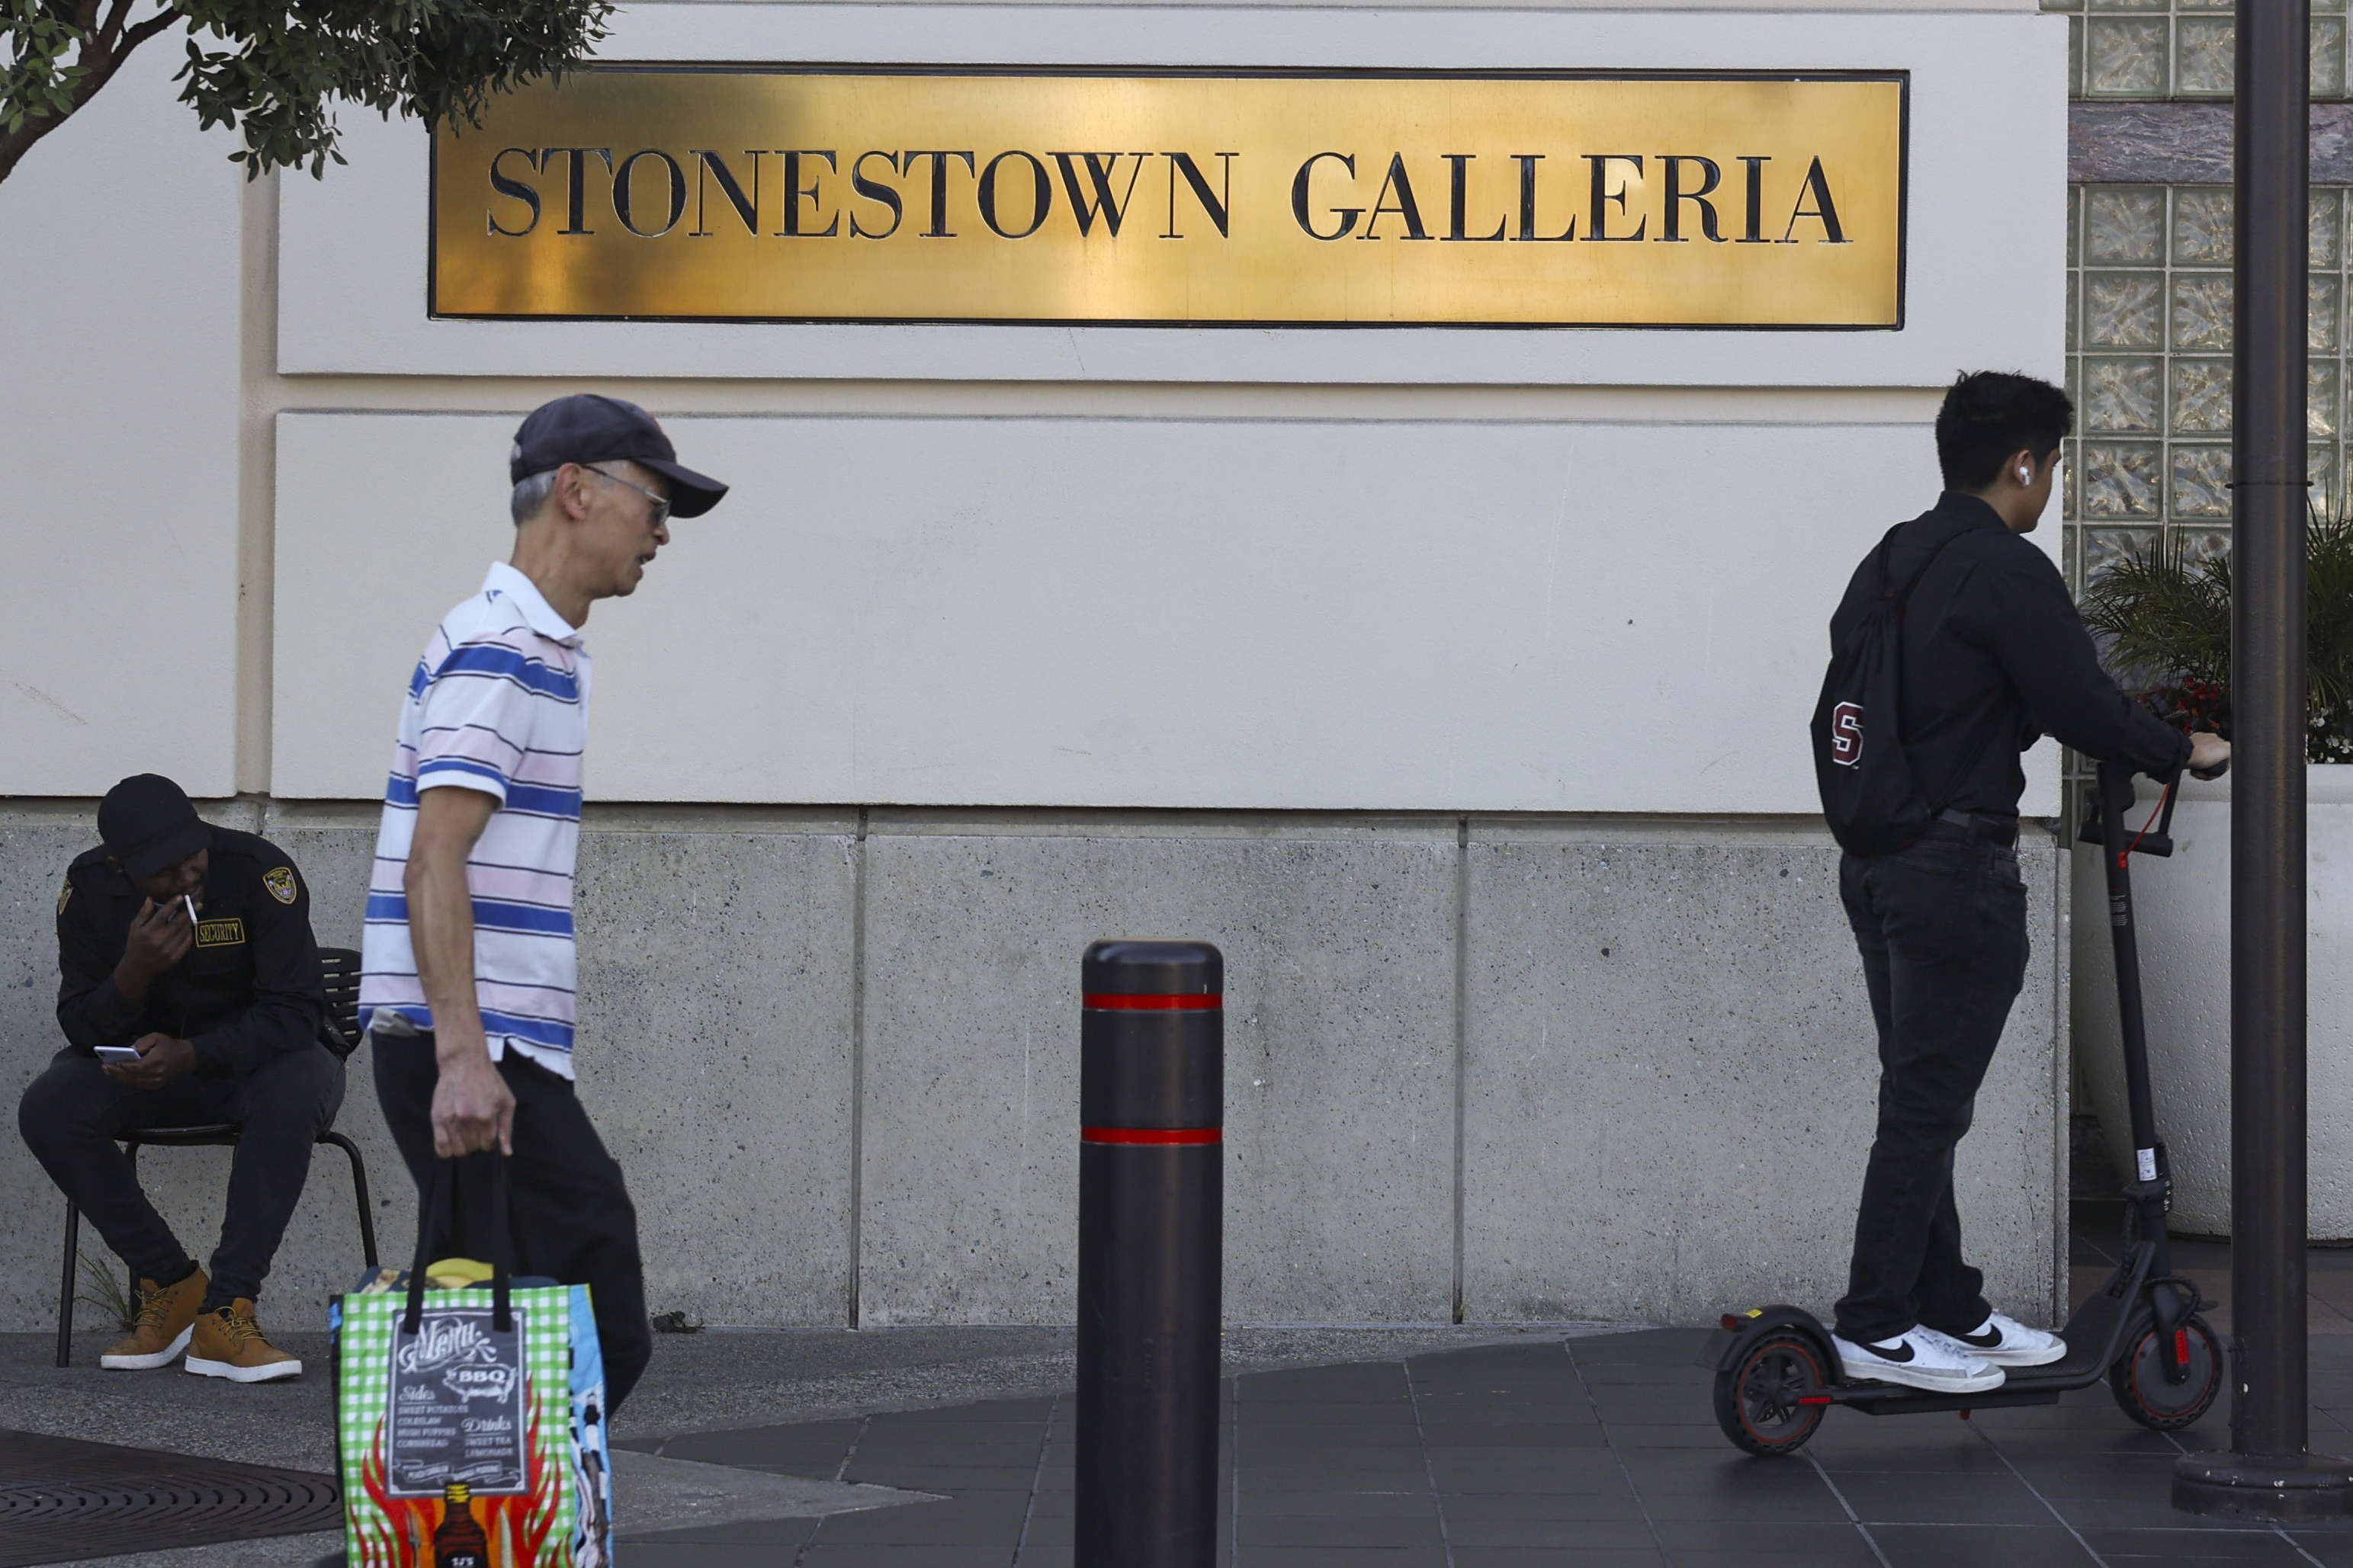 Two shoppers walk past a brass plaque that reads, "Stonestown Galleria."